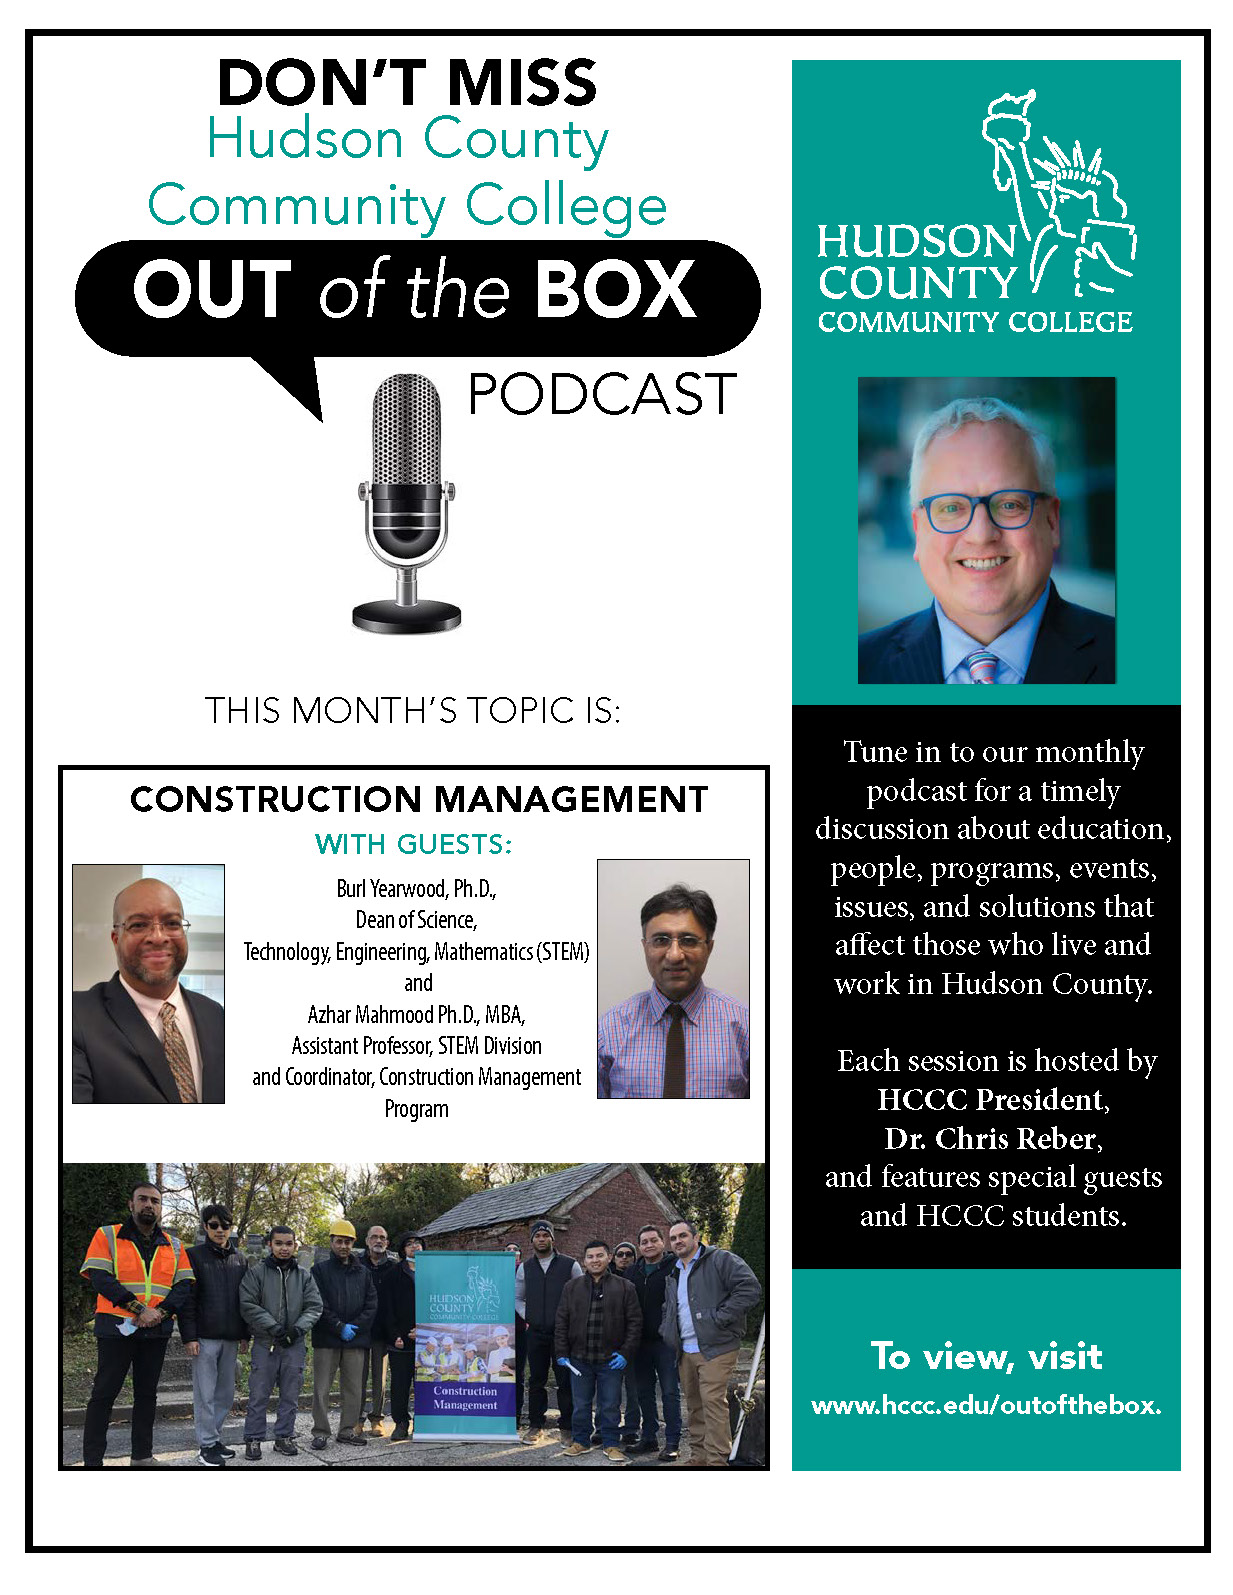 Out of the Box - Construction Management